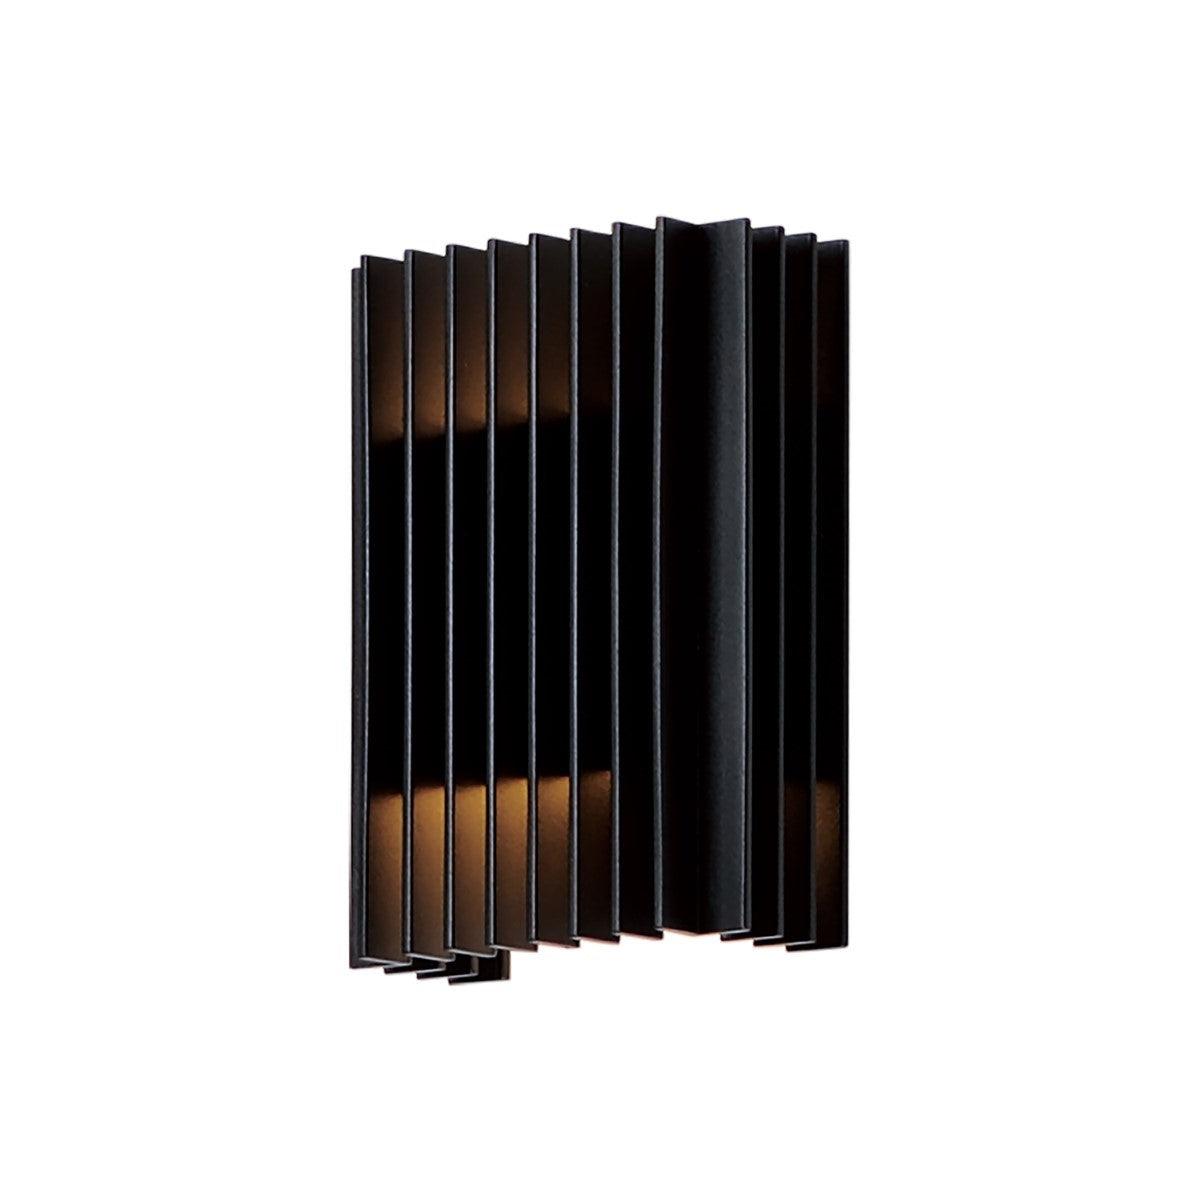 Rampart 6 in. LED Outdoor Wall Sconce 3000K Black Finish